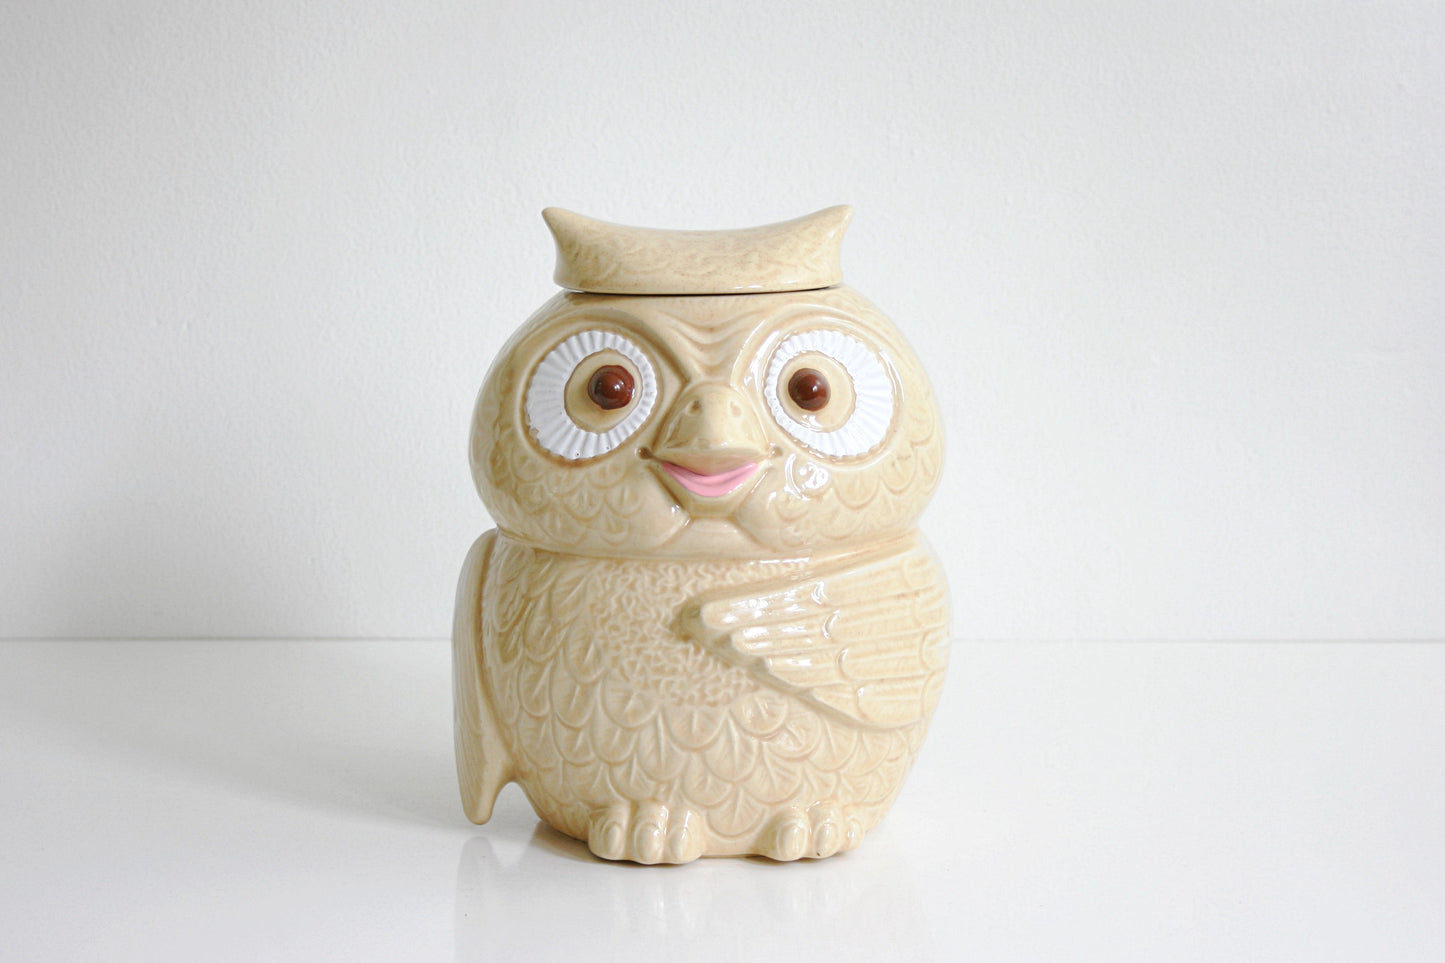 SOLD - Vintage McCoy Woodsy Owl Cookie Jar / Mid Century McCoy Owl Canister in Cream and Pink